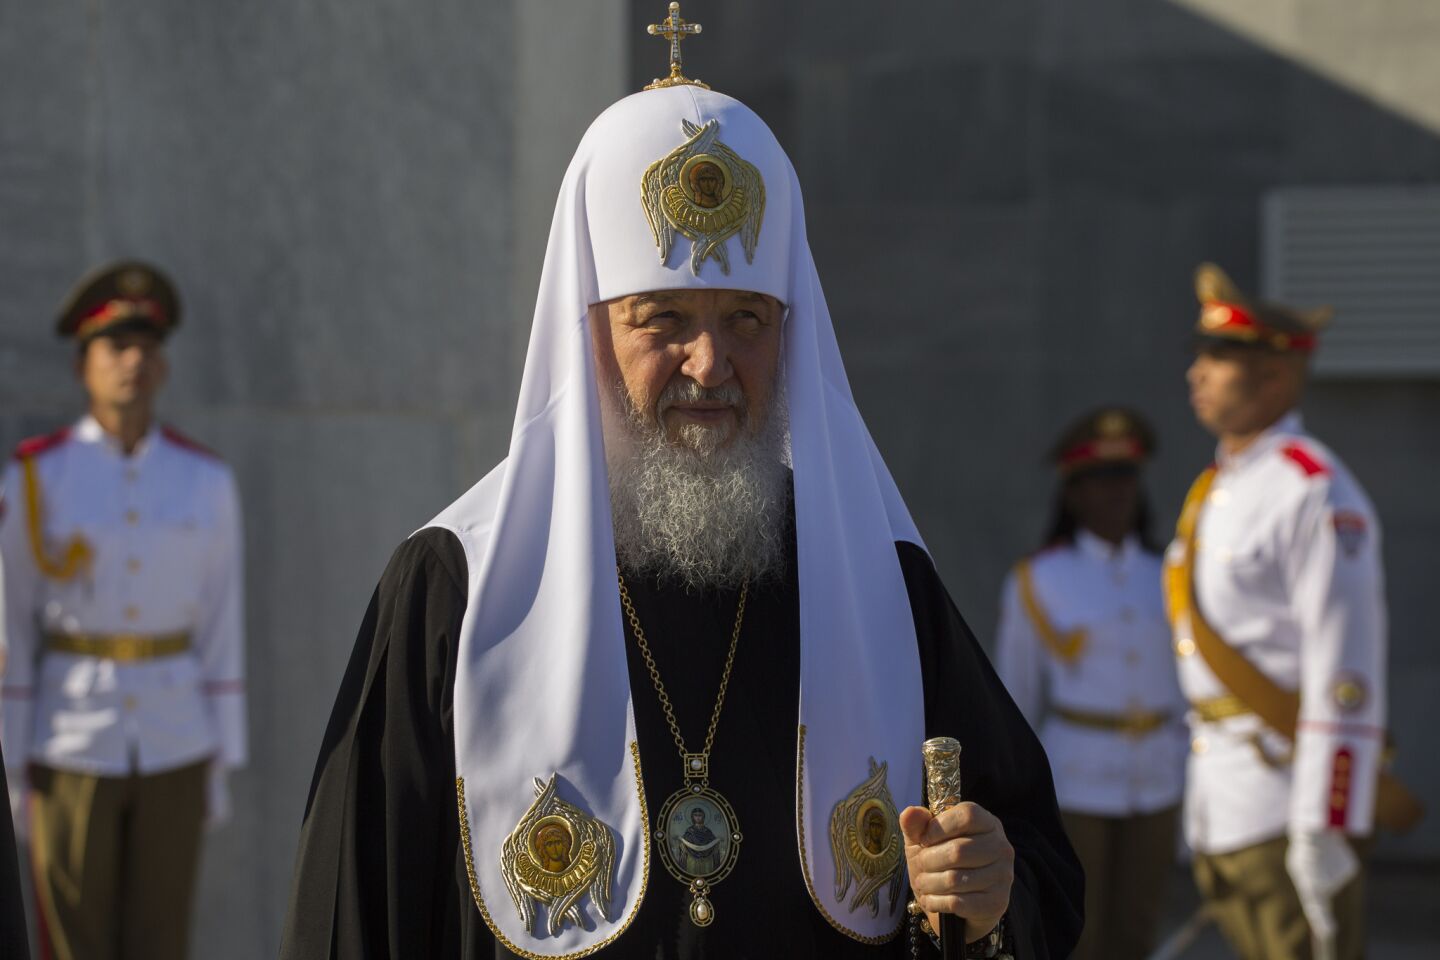 Pope Francis and Patriarch Kirill